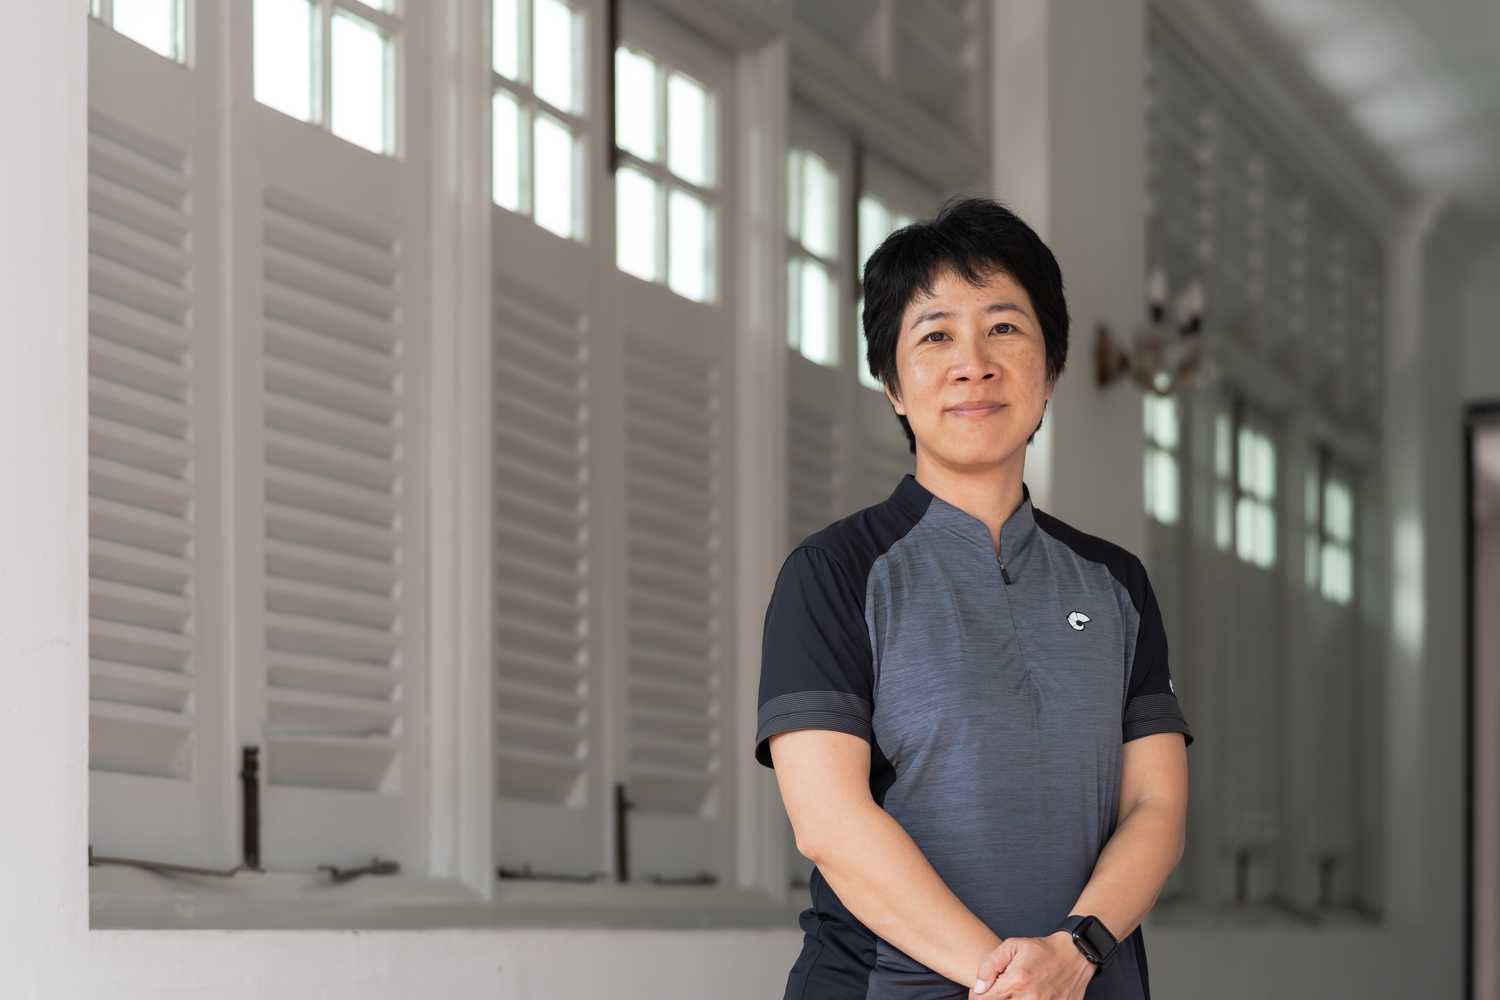 Supt Toh standing in a passage way, with short black hair, grey civilian short sleeve top, with arms infront of her where her left hand is covering her right hand. 